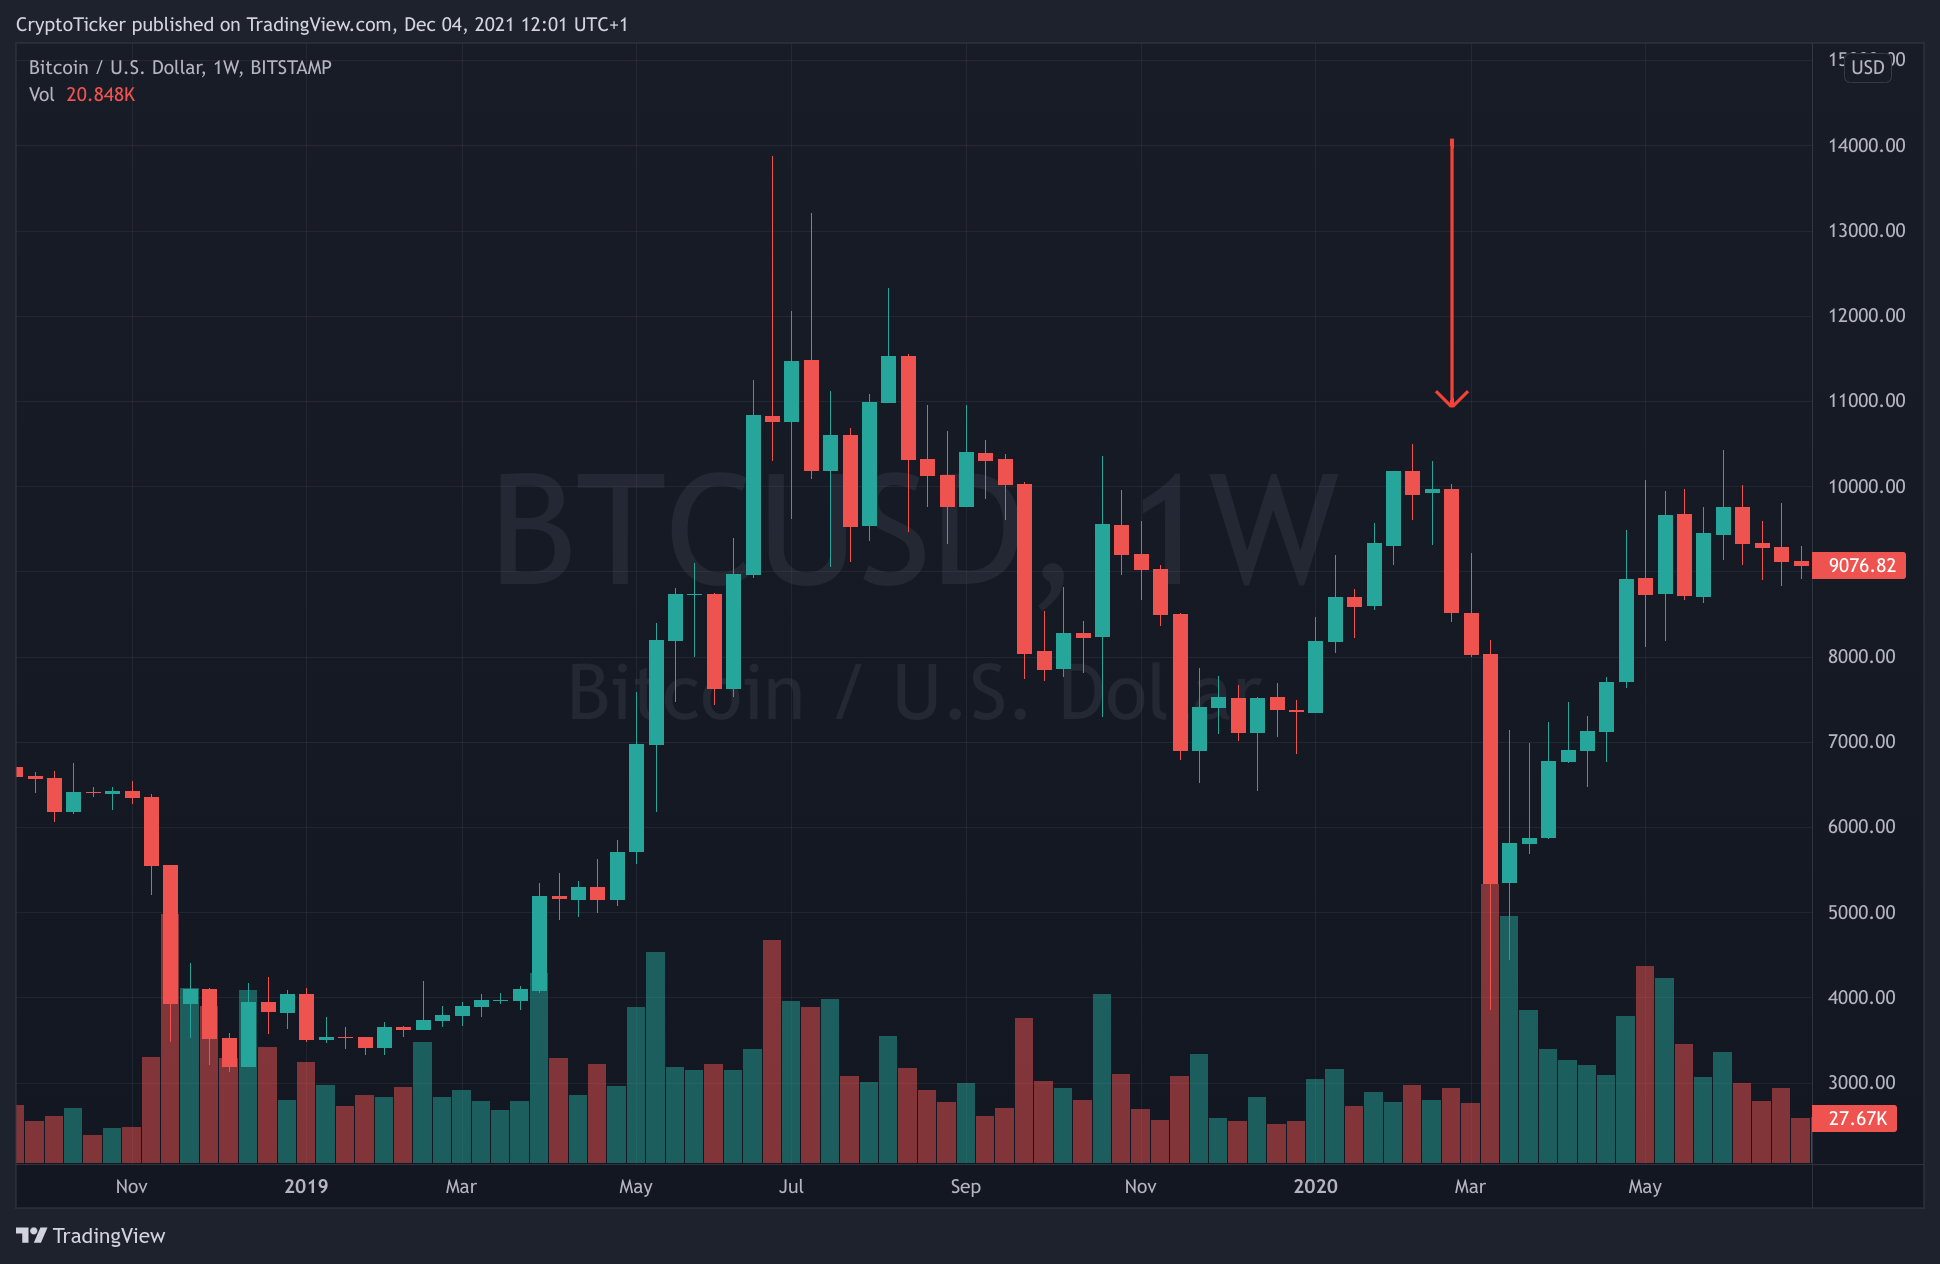 BTC/USD 1-week chart showing the previous Covid-crash in March 2021